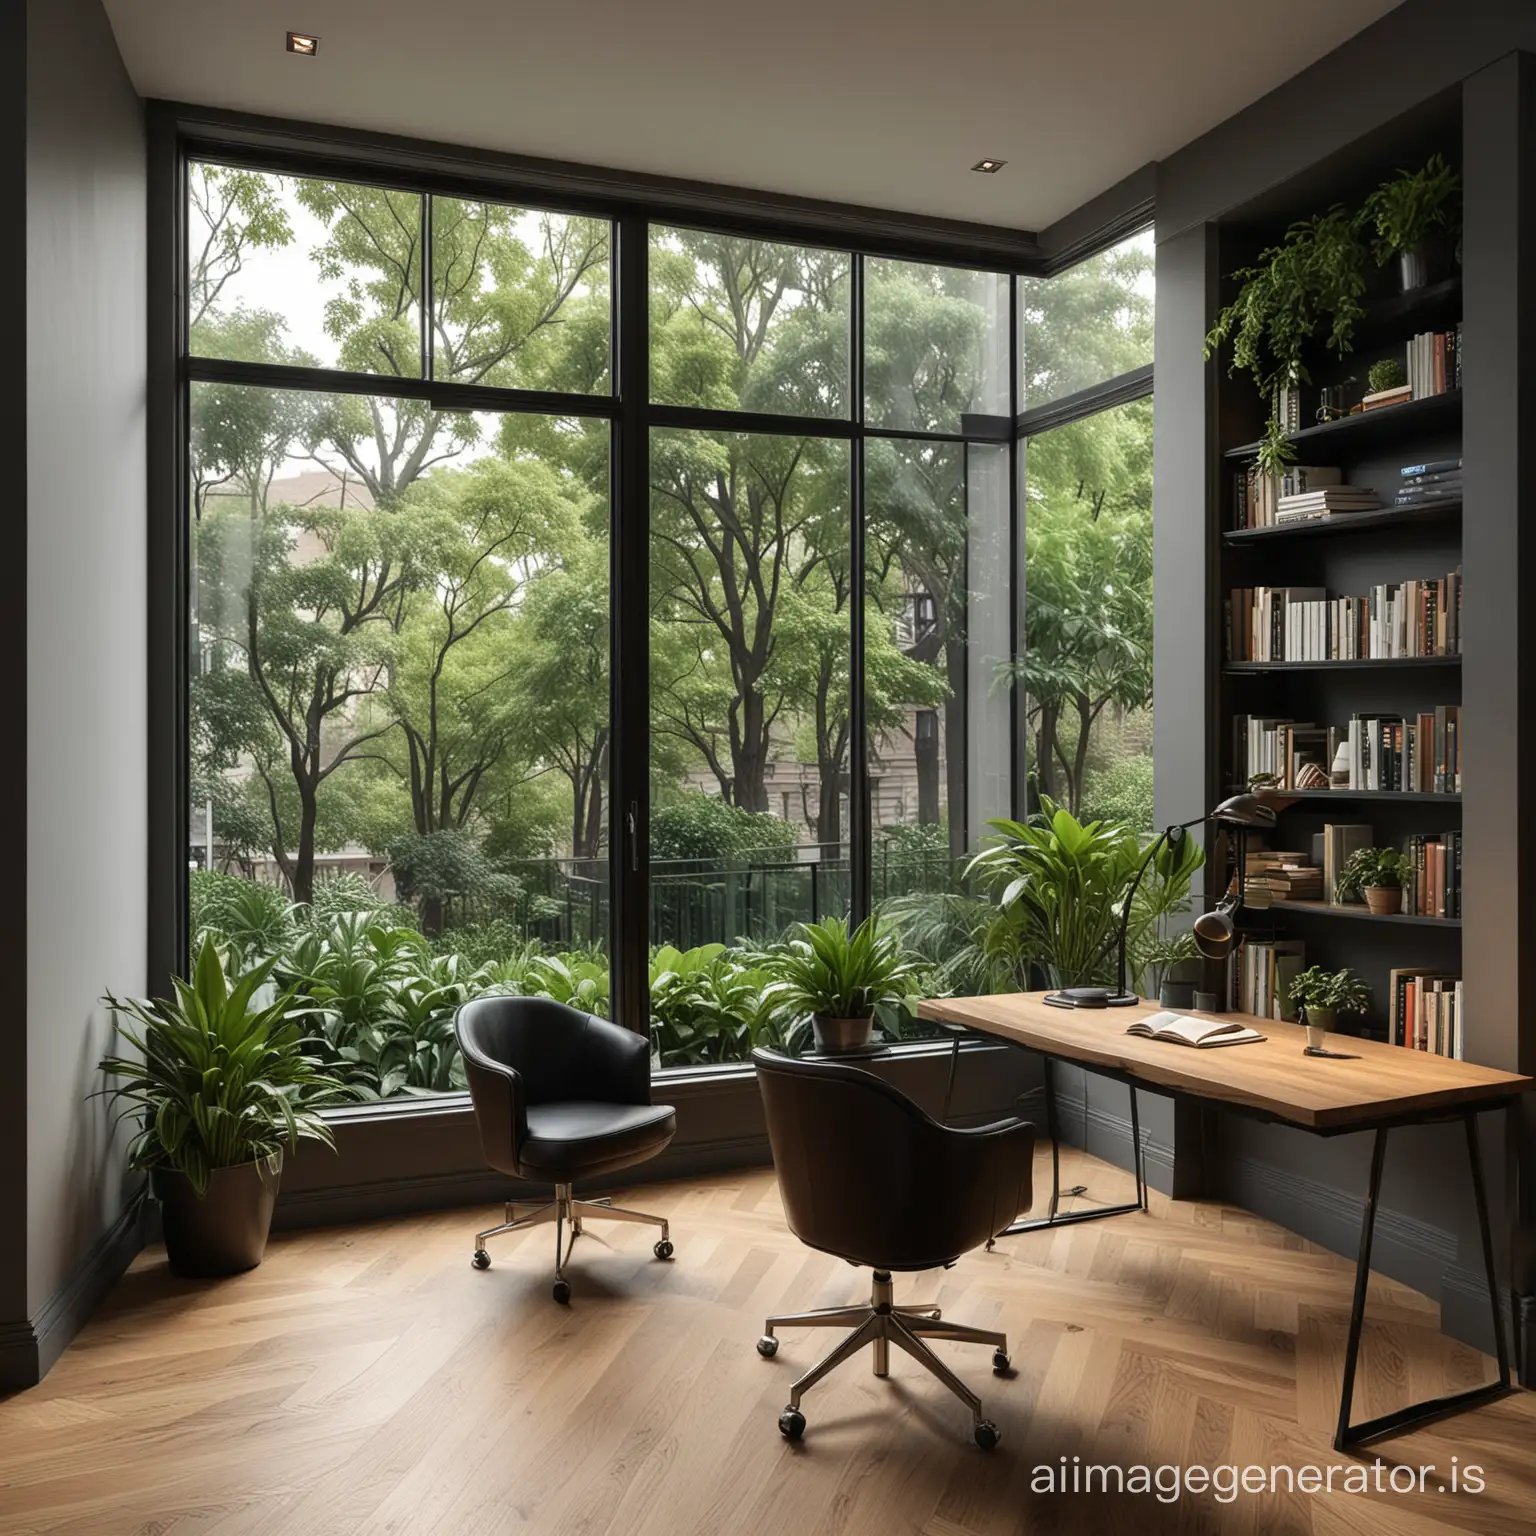 Elegant-Study-Room-with-Oak-Floors-and-City-Park-View